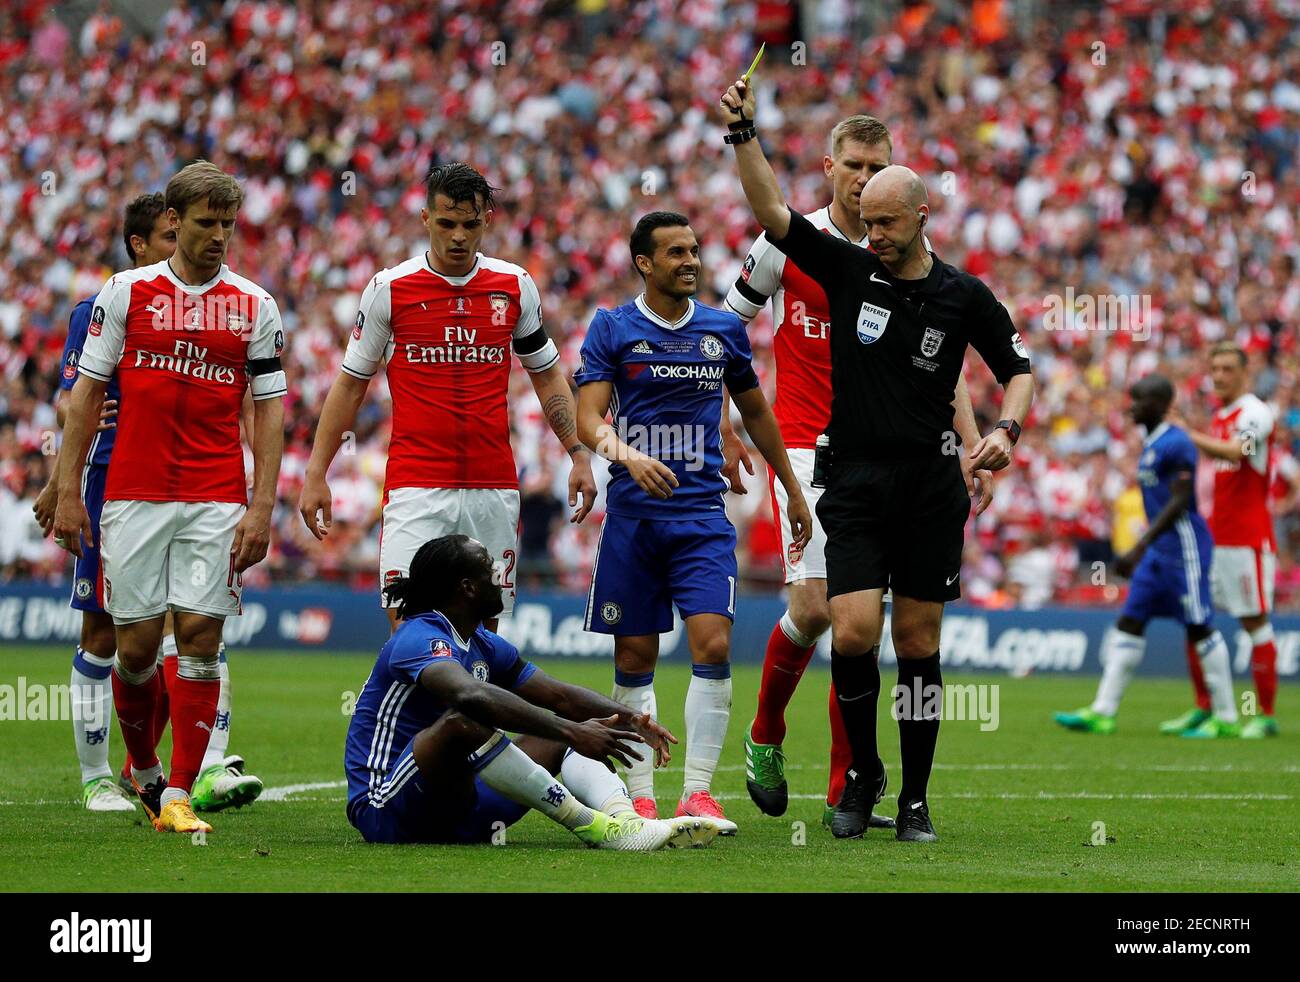 Britain Soccer Football - Arsenal v Chelsea - FA Cup Final - Wembley  Stadium - 27/5/17 Chelsea's Victor Moses is shown a second yellow card by  referee Anthony Taylor for simulation resulting